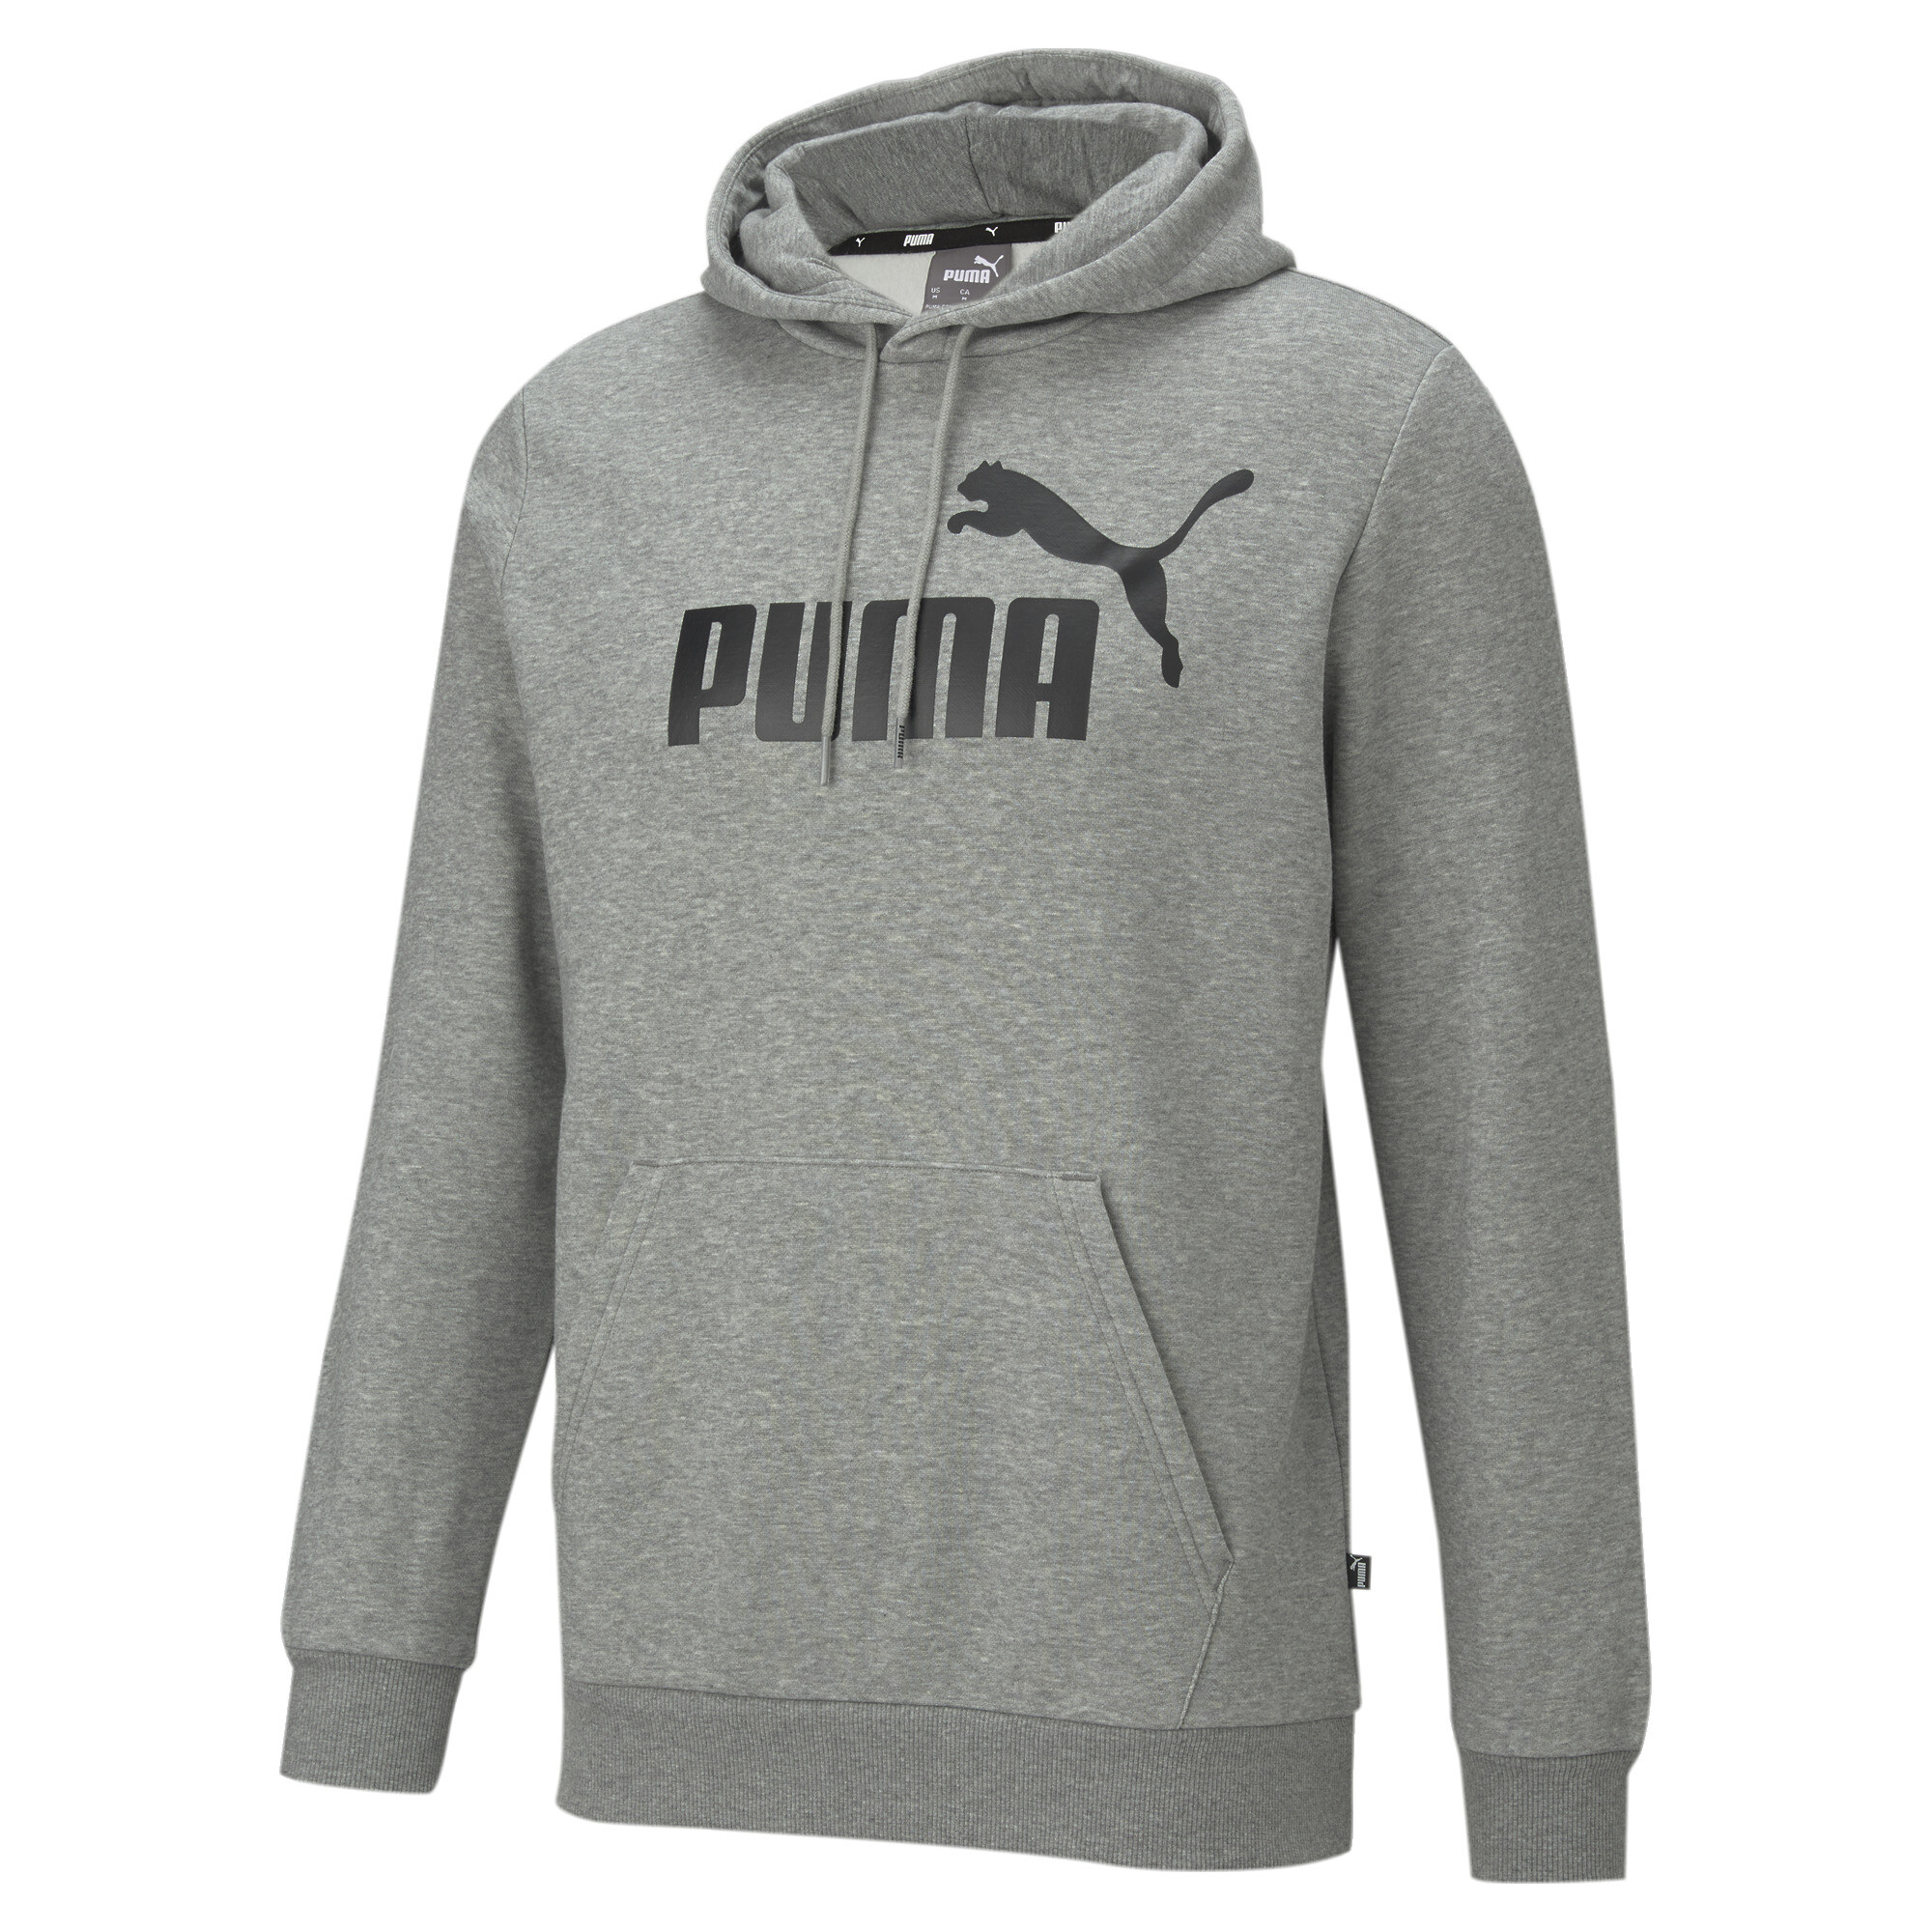 PUMA Long Sleeve Running T-shirt in Grey for Men Mens Clothing T-shirts Long-sleeve t-shirts 